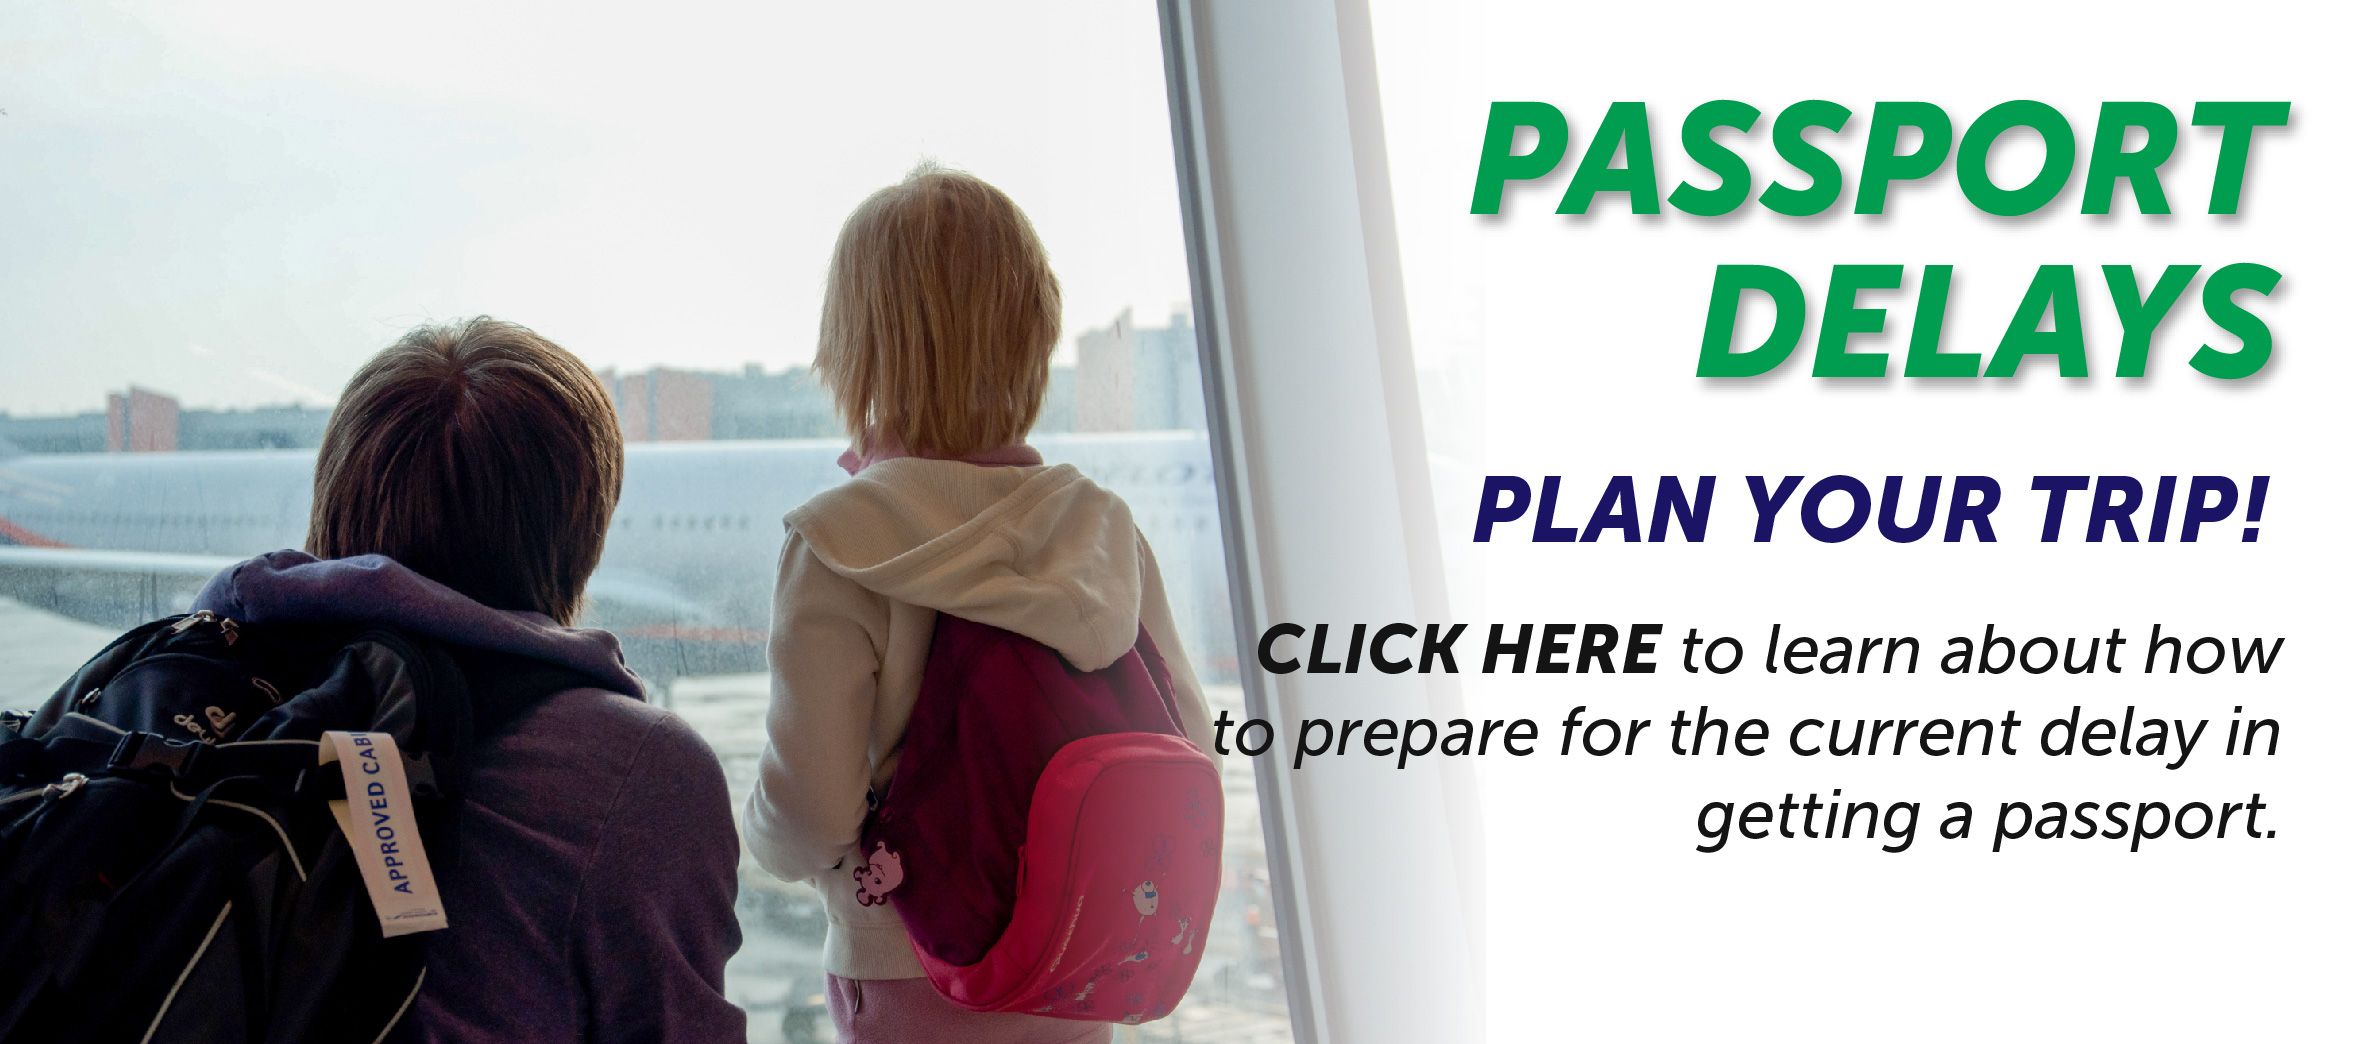 The Passport Agency currently has a backlog that is causing delays in releasing or obtaining passports.  The suggestion of the Office of Child Support is to request your passport 6 months prior to your anticipated date of travel.  